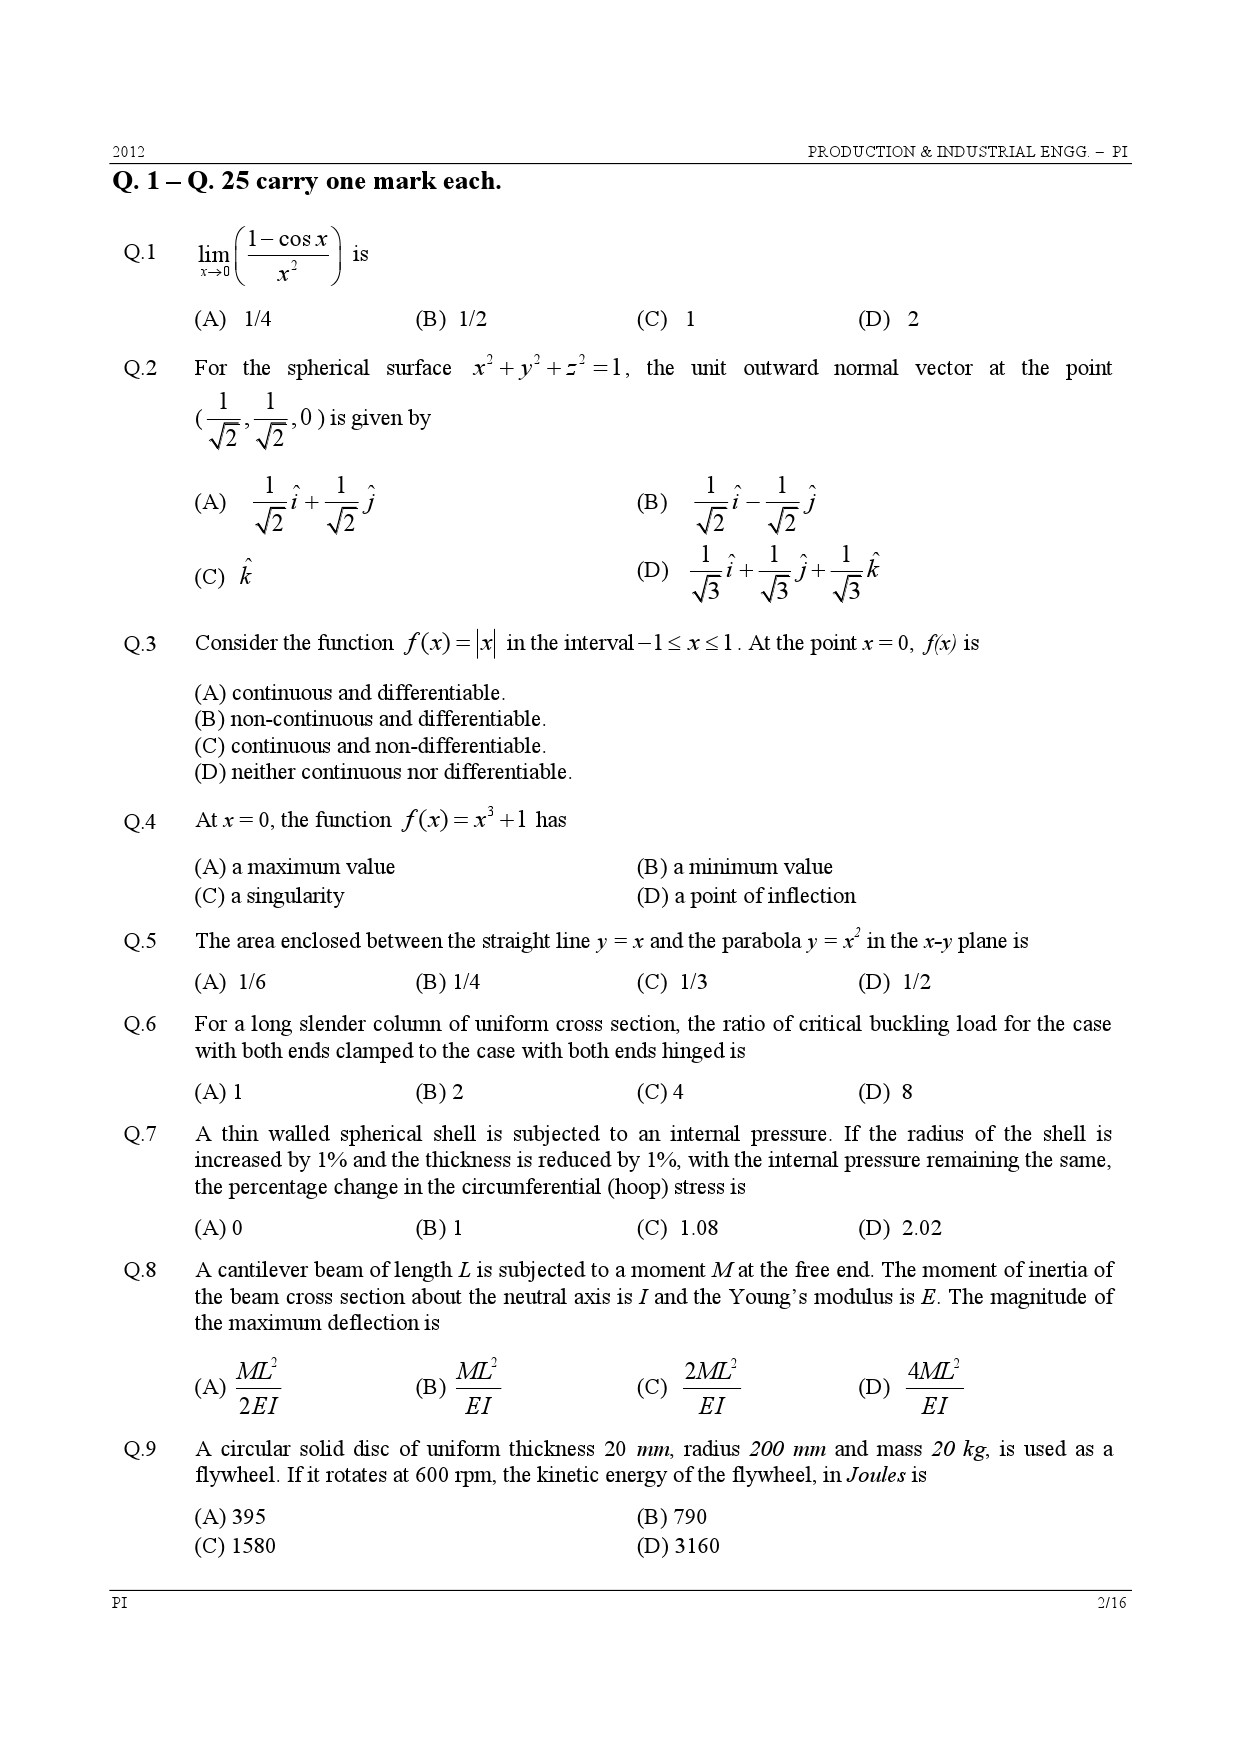 GATE Exam Question Paper 2012 Production and Industrial Engineering 2